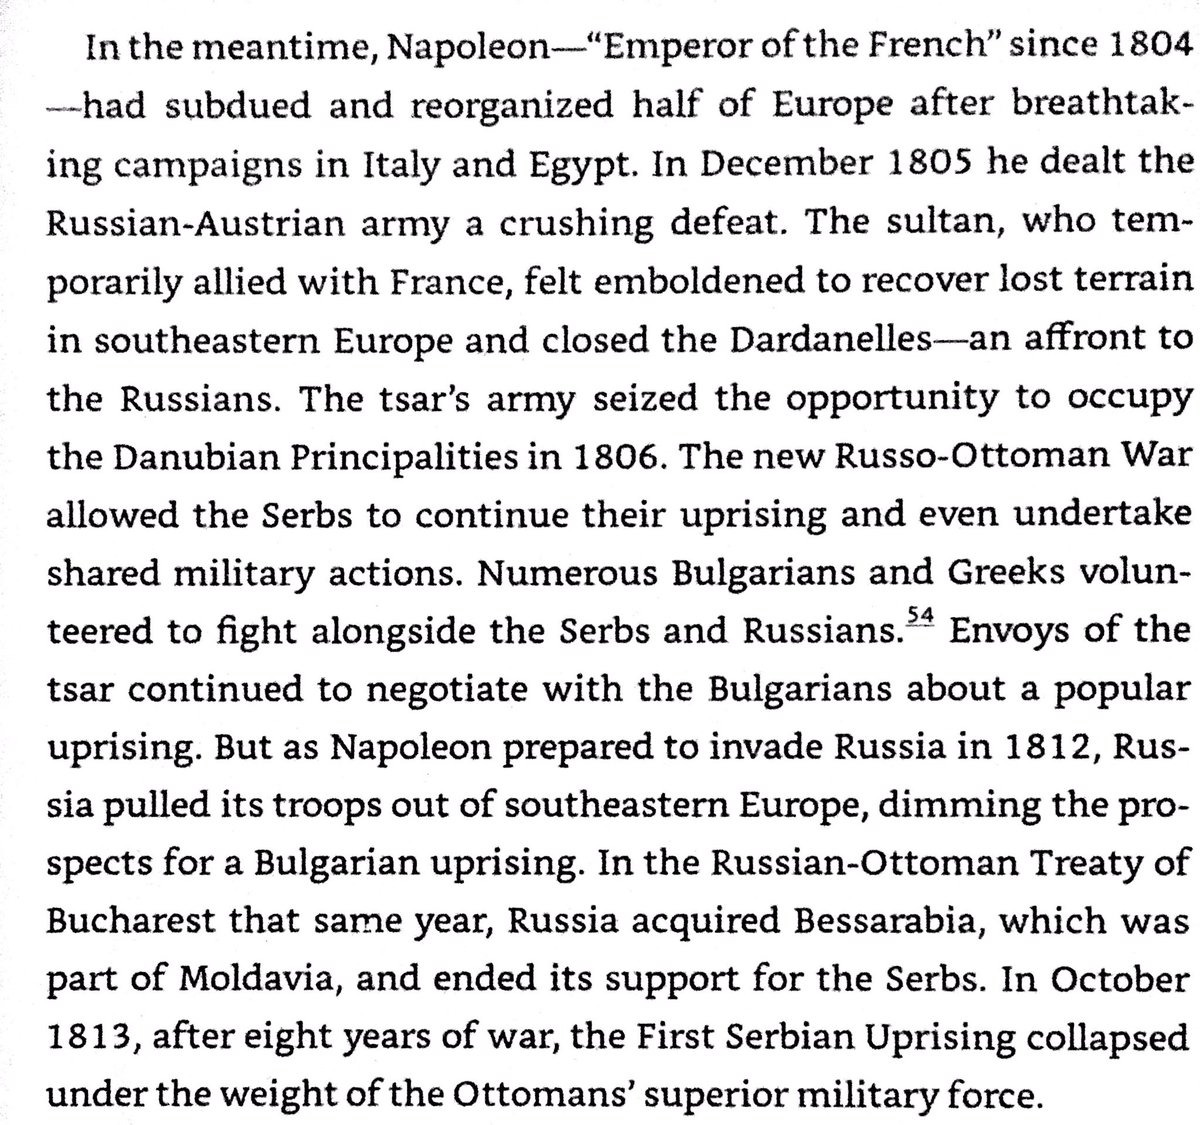 Renegade Janissaries overthrew Belgrade governor in 1801 & ruled tyrannically. Djordje Petrovic aka Karadjordje led Serb rebellion against them in 1804, turning into it into an independence war in 1805. Ottomans crushed the Serb rebels in 1813.